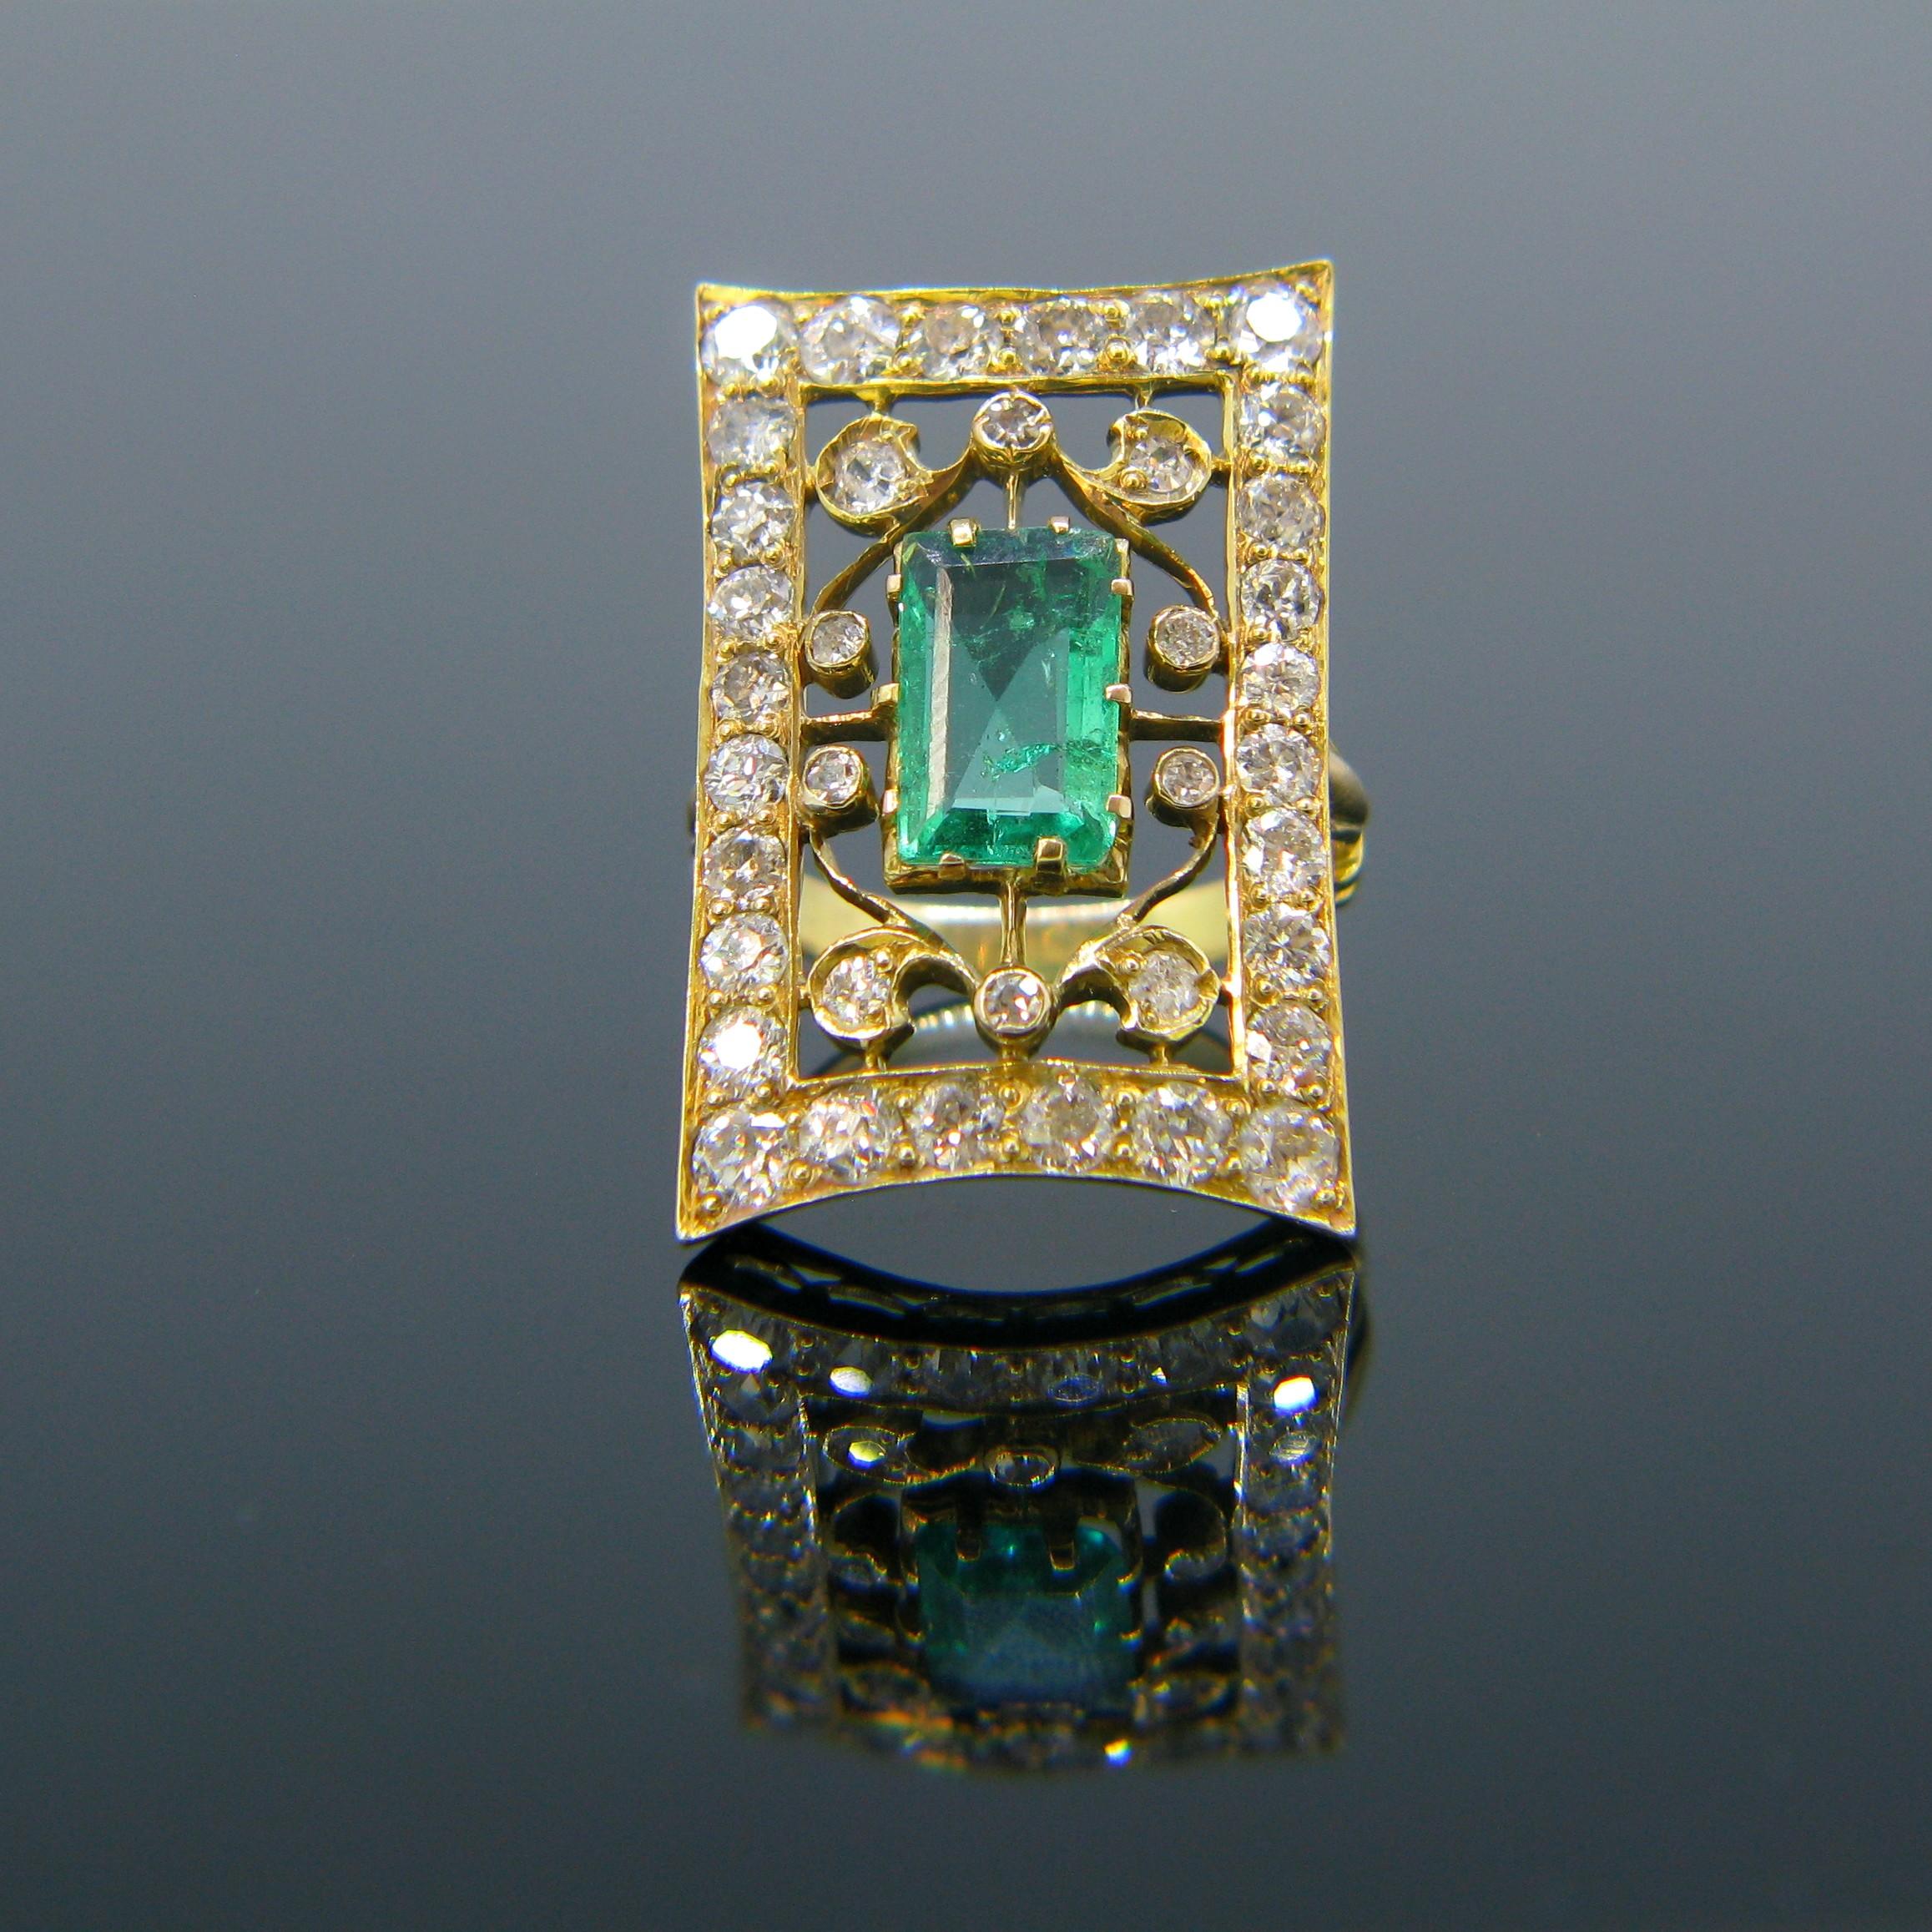 This rectangular shaped ring was made in the 1930s. It is set with an emerald weighing around 1.45ct. The ring has a beautiful design with scrollwork motifs. It is also set all around with old cut diamonds. The total diamond carat weight is around